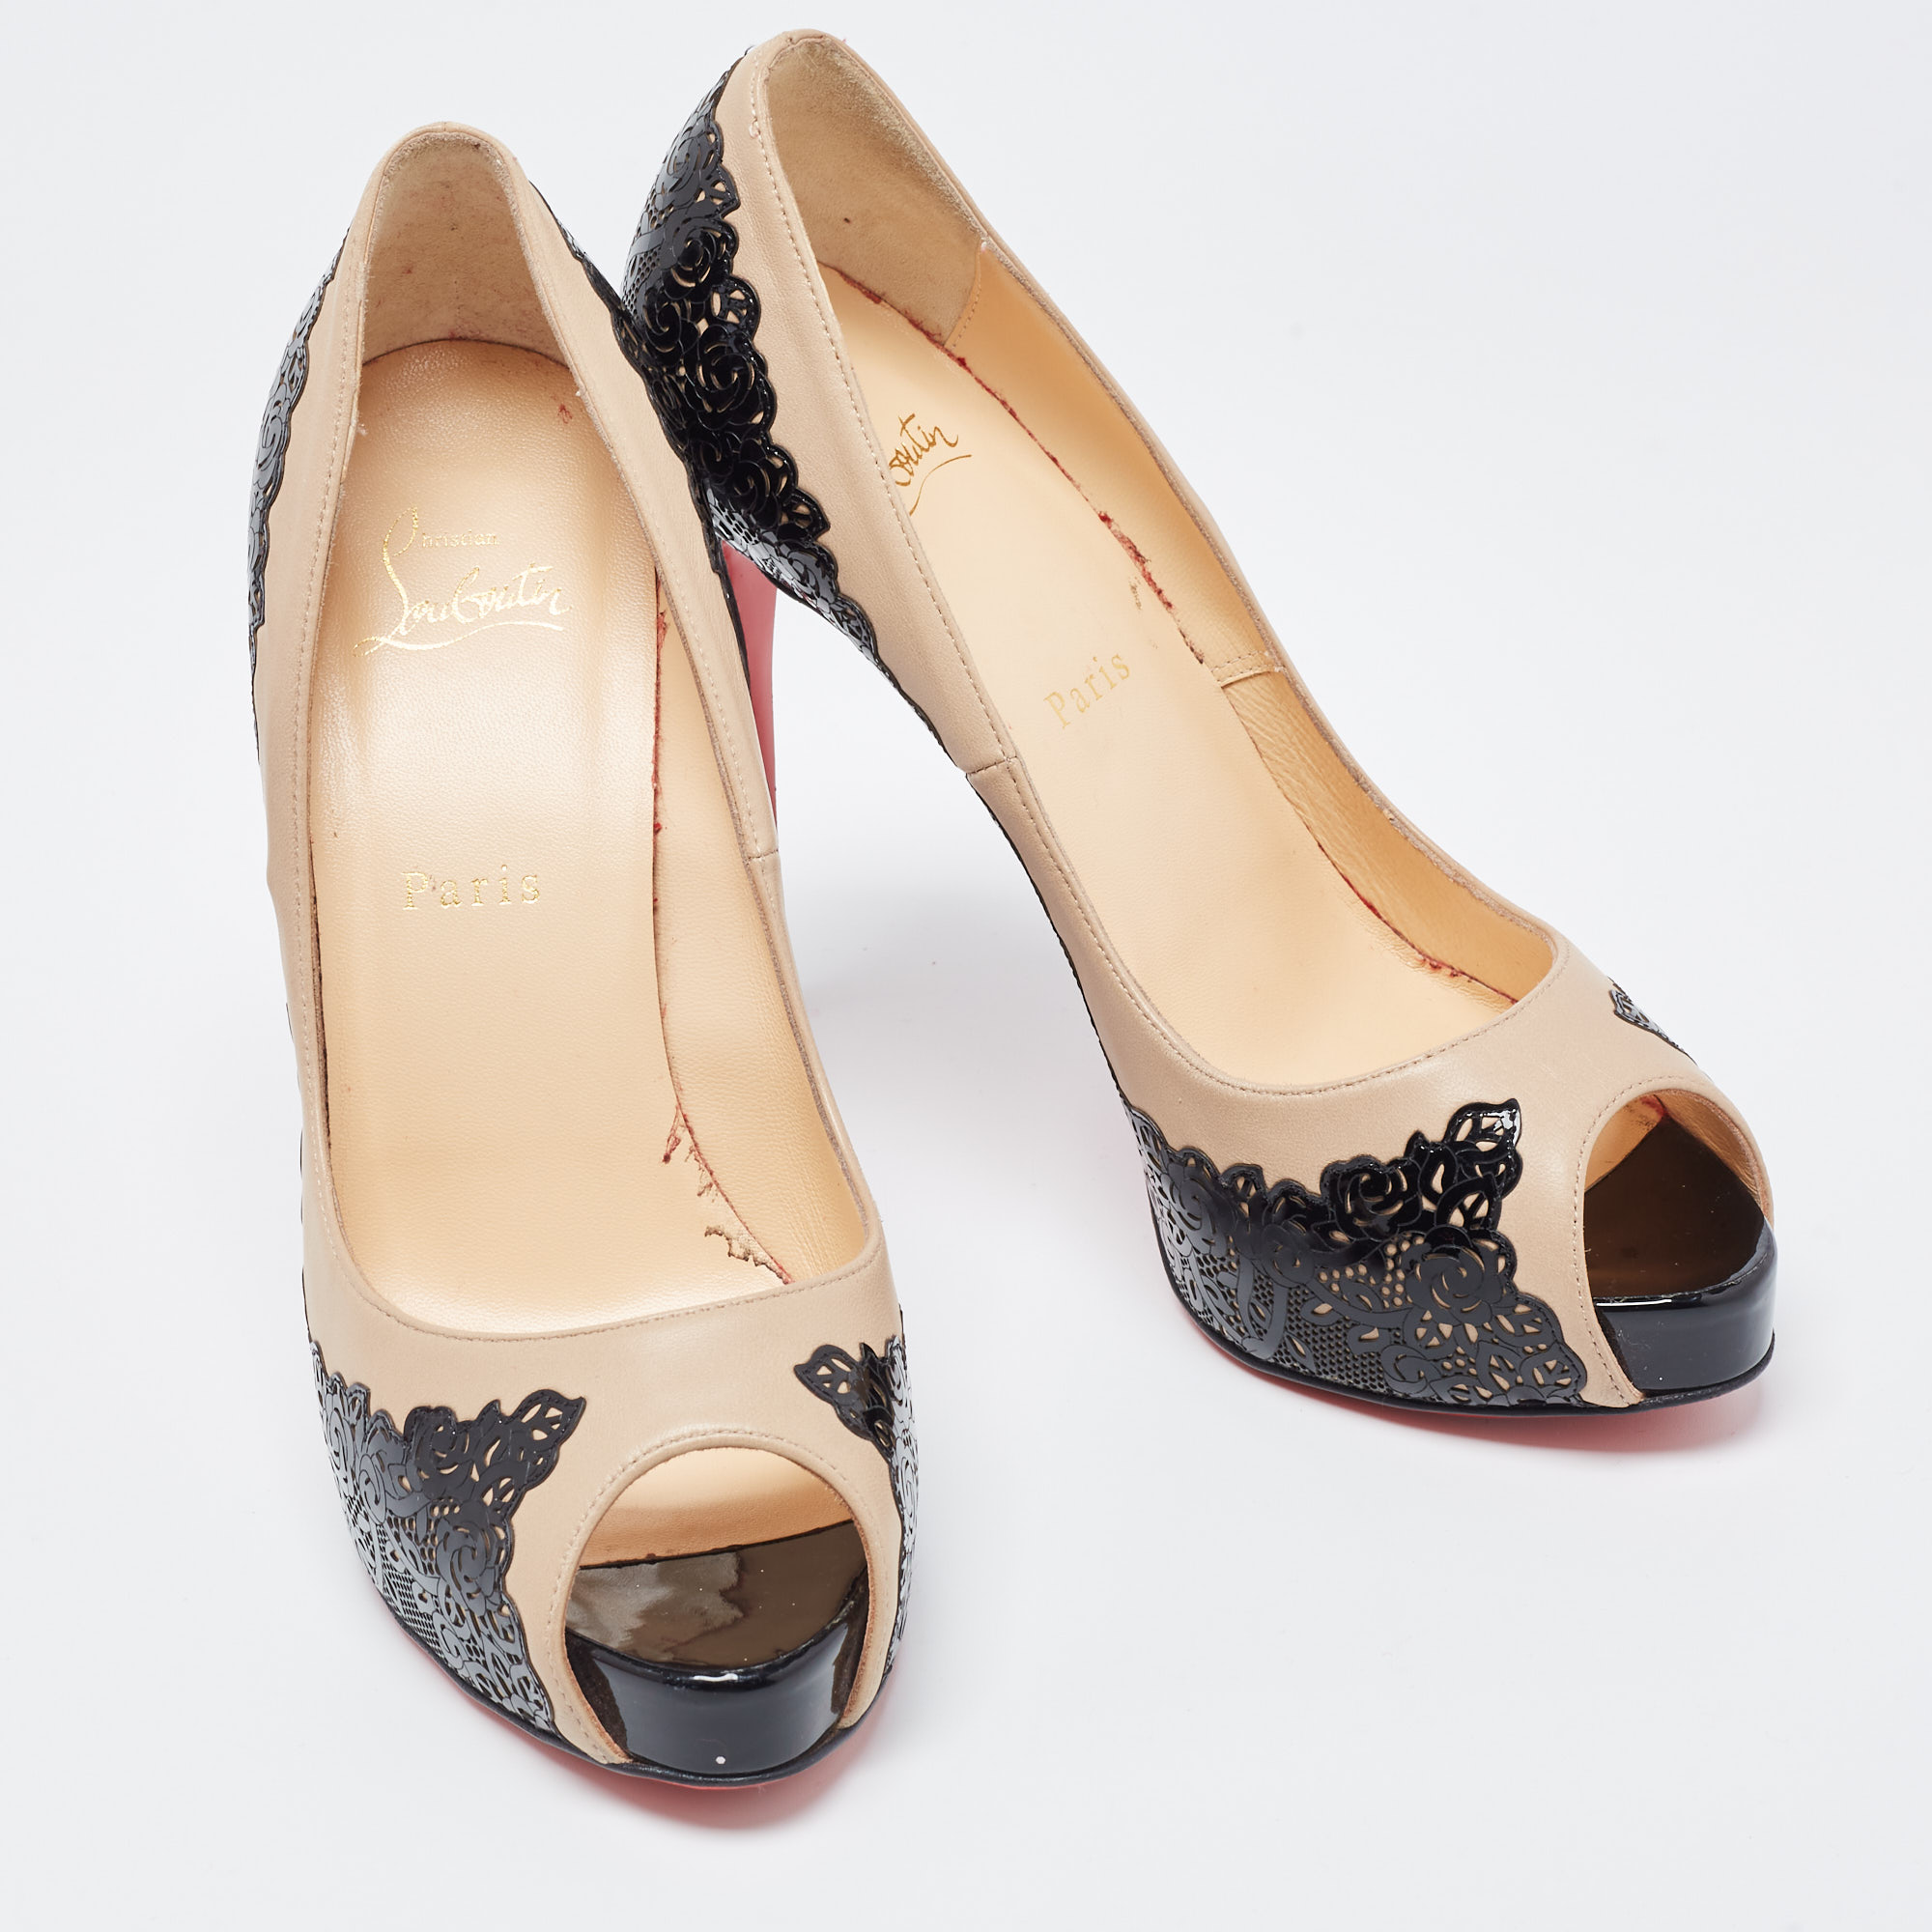 Christian Louboutin Two Tone Laser Cut Patent And Leather Veramucha Peep Toe Pumps Size 39